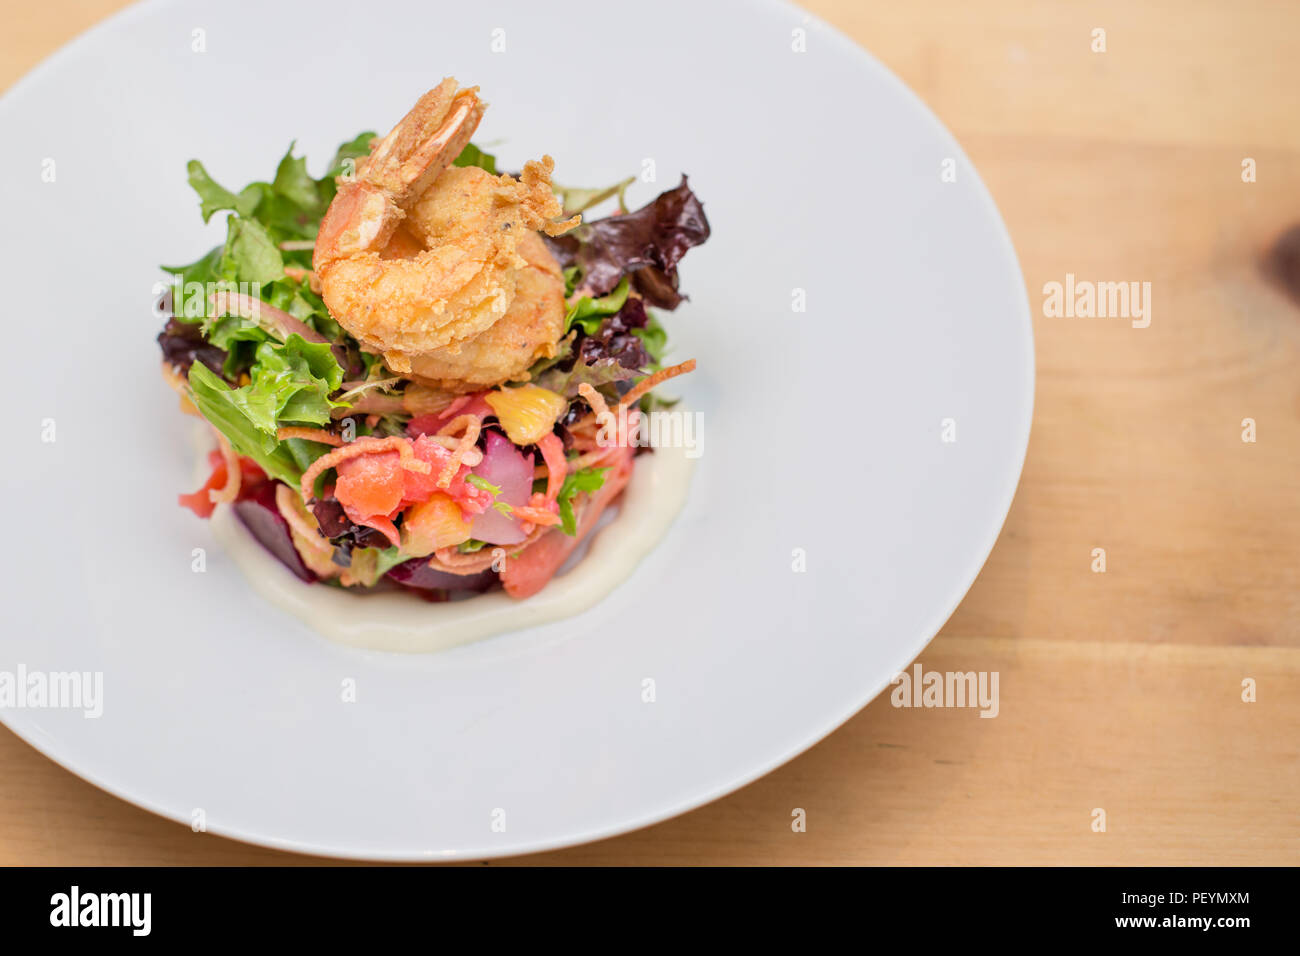 A prawn salad with beets on a white plate. Stock Photo